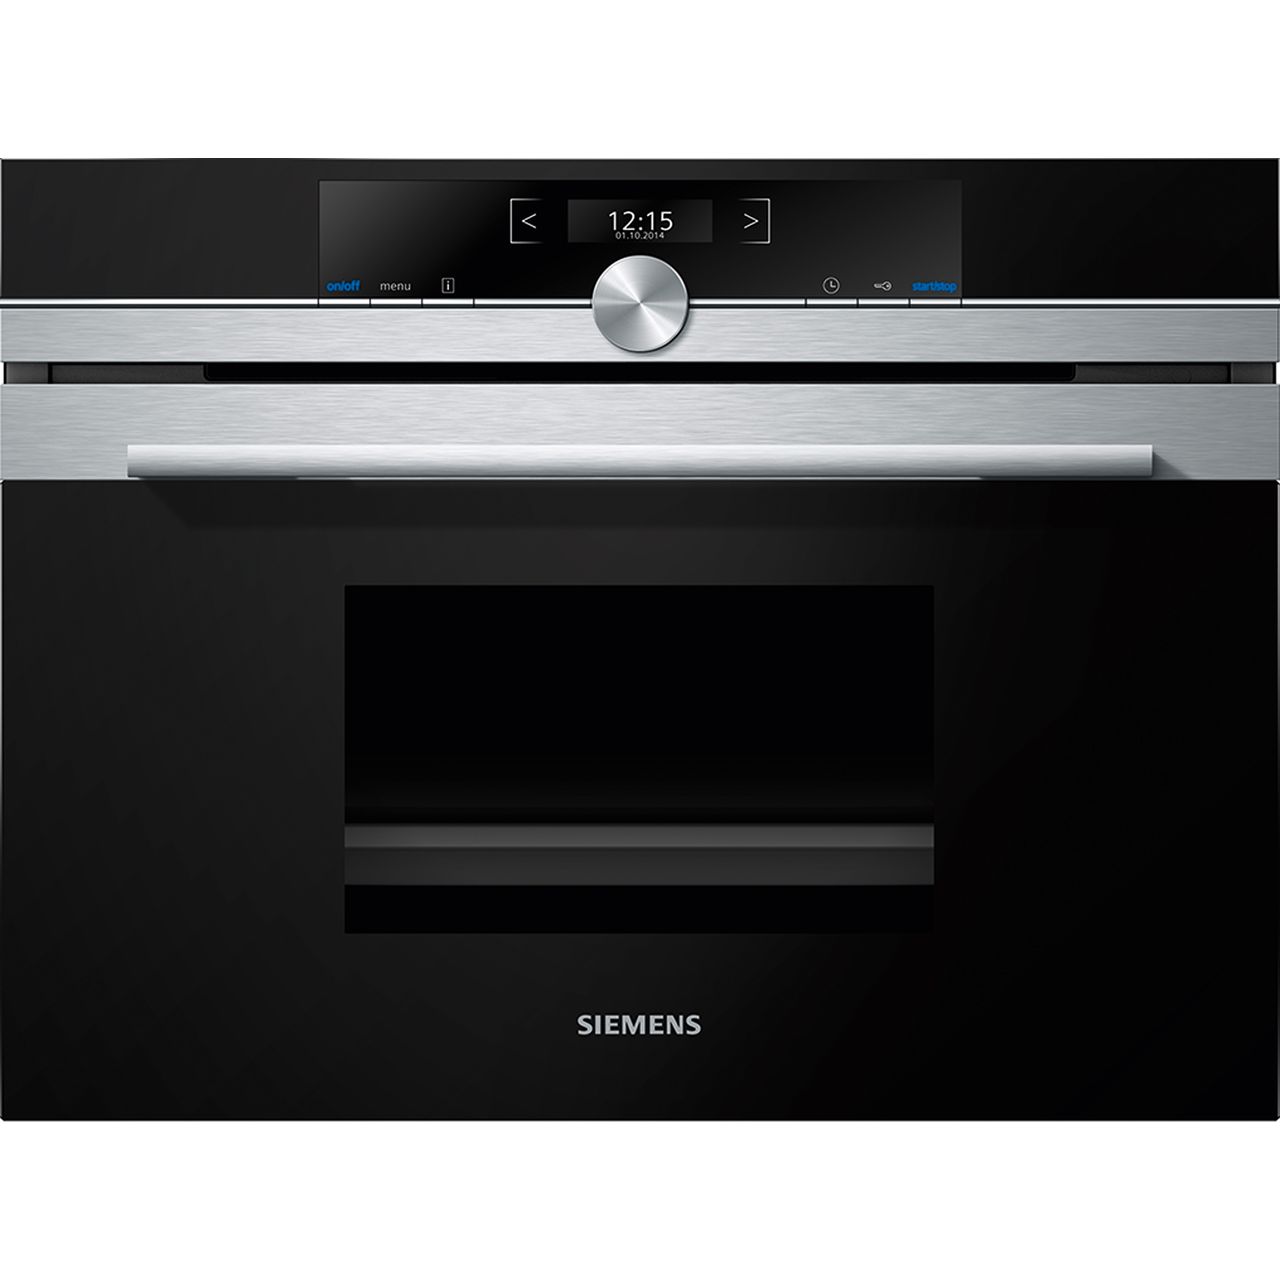 Siemens IQ-700 CD634GAS0B Built In Compact Steam Oven Review